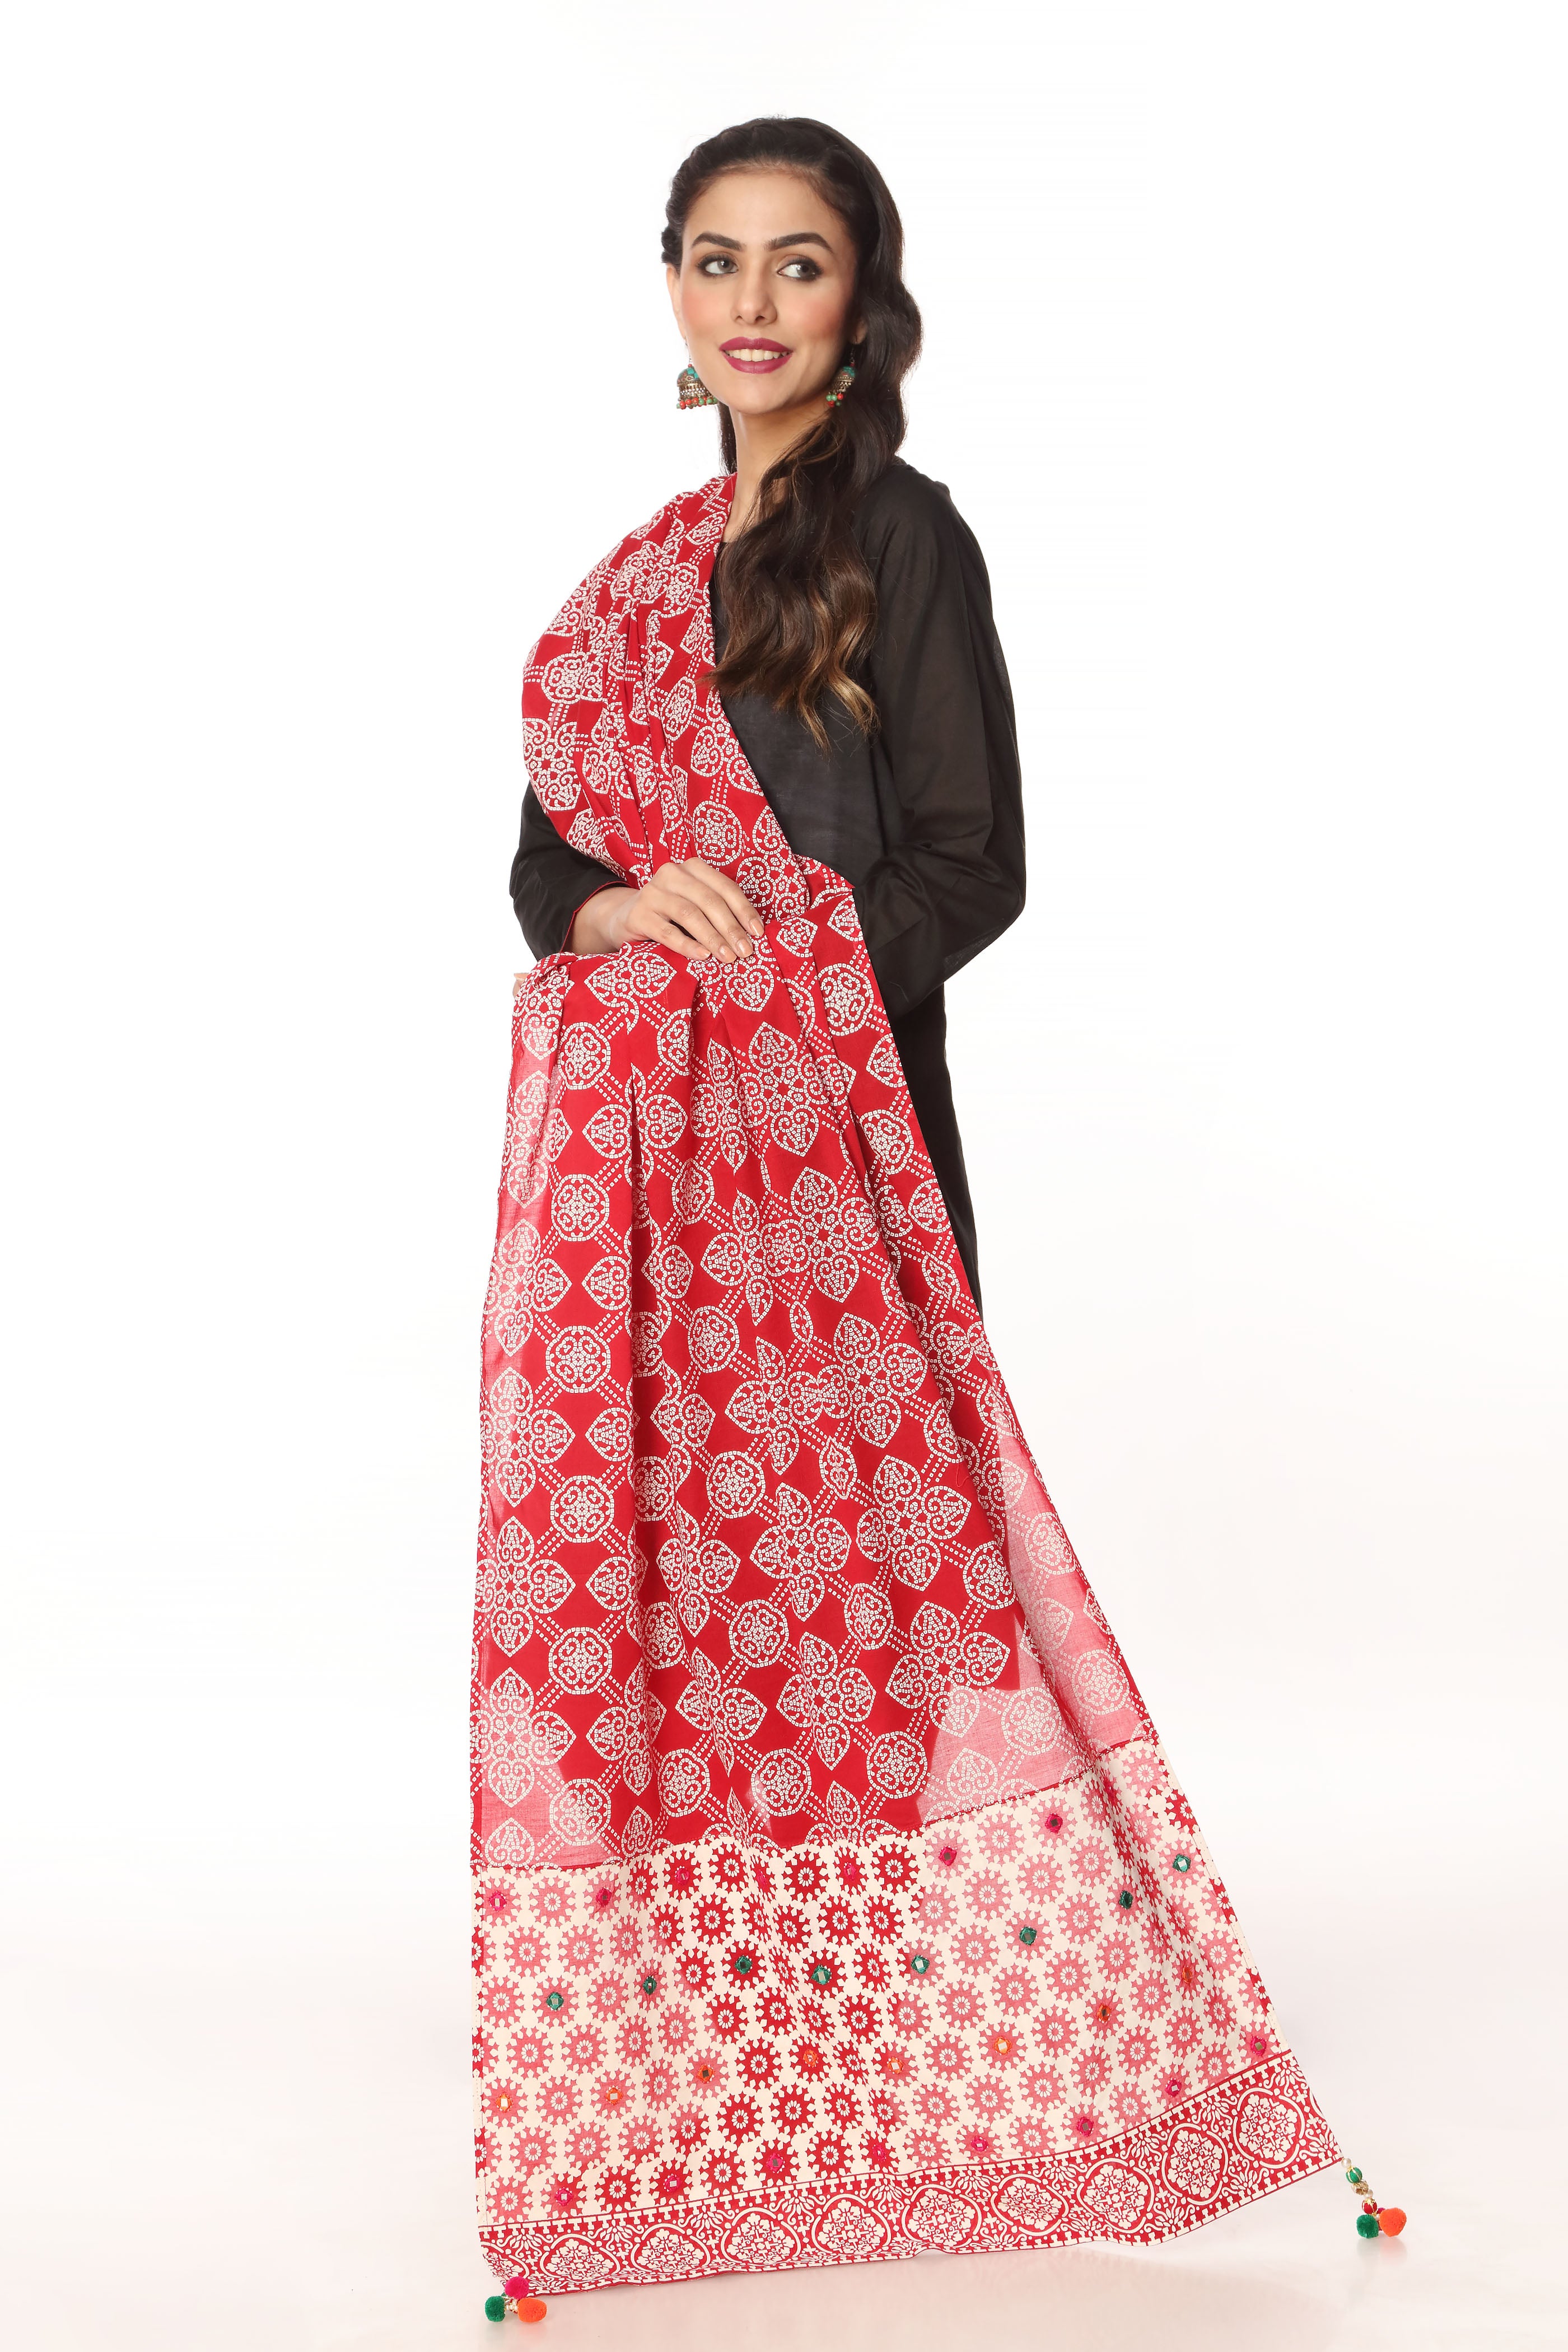 Black And White in Red coloured Printed Lawn fabric 2